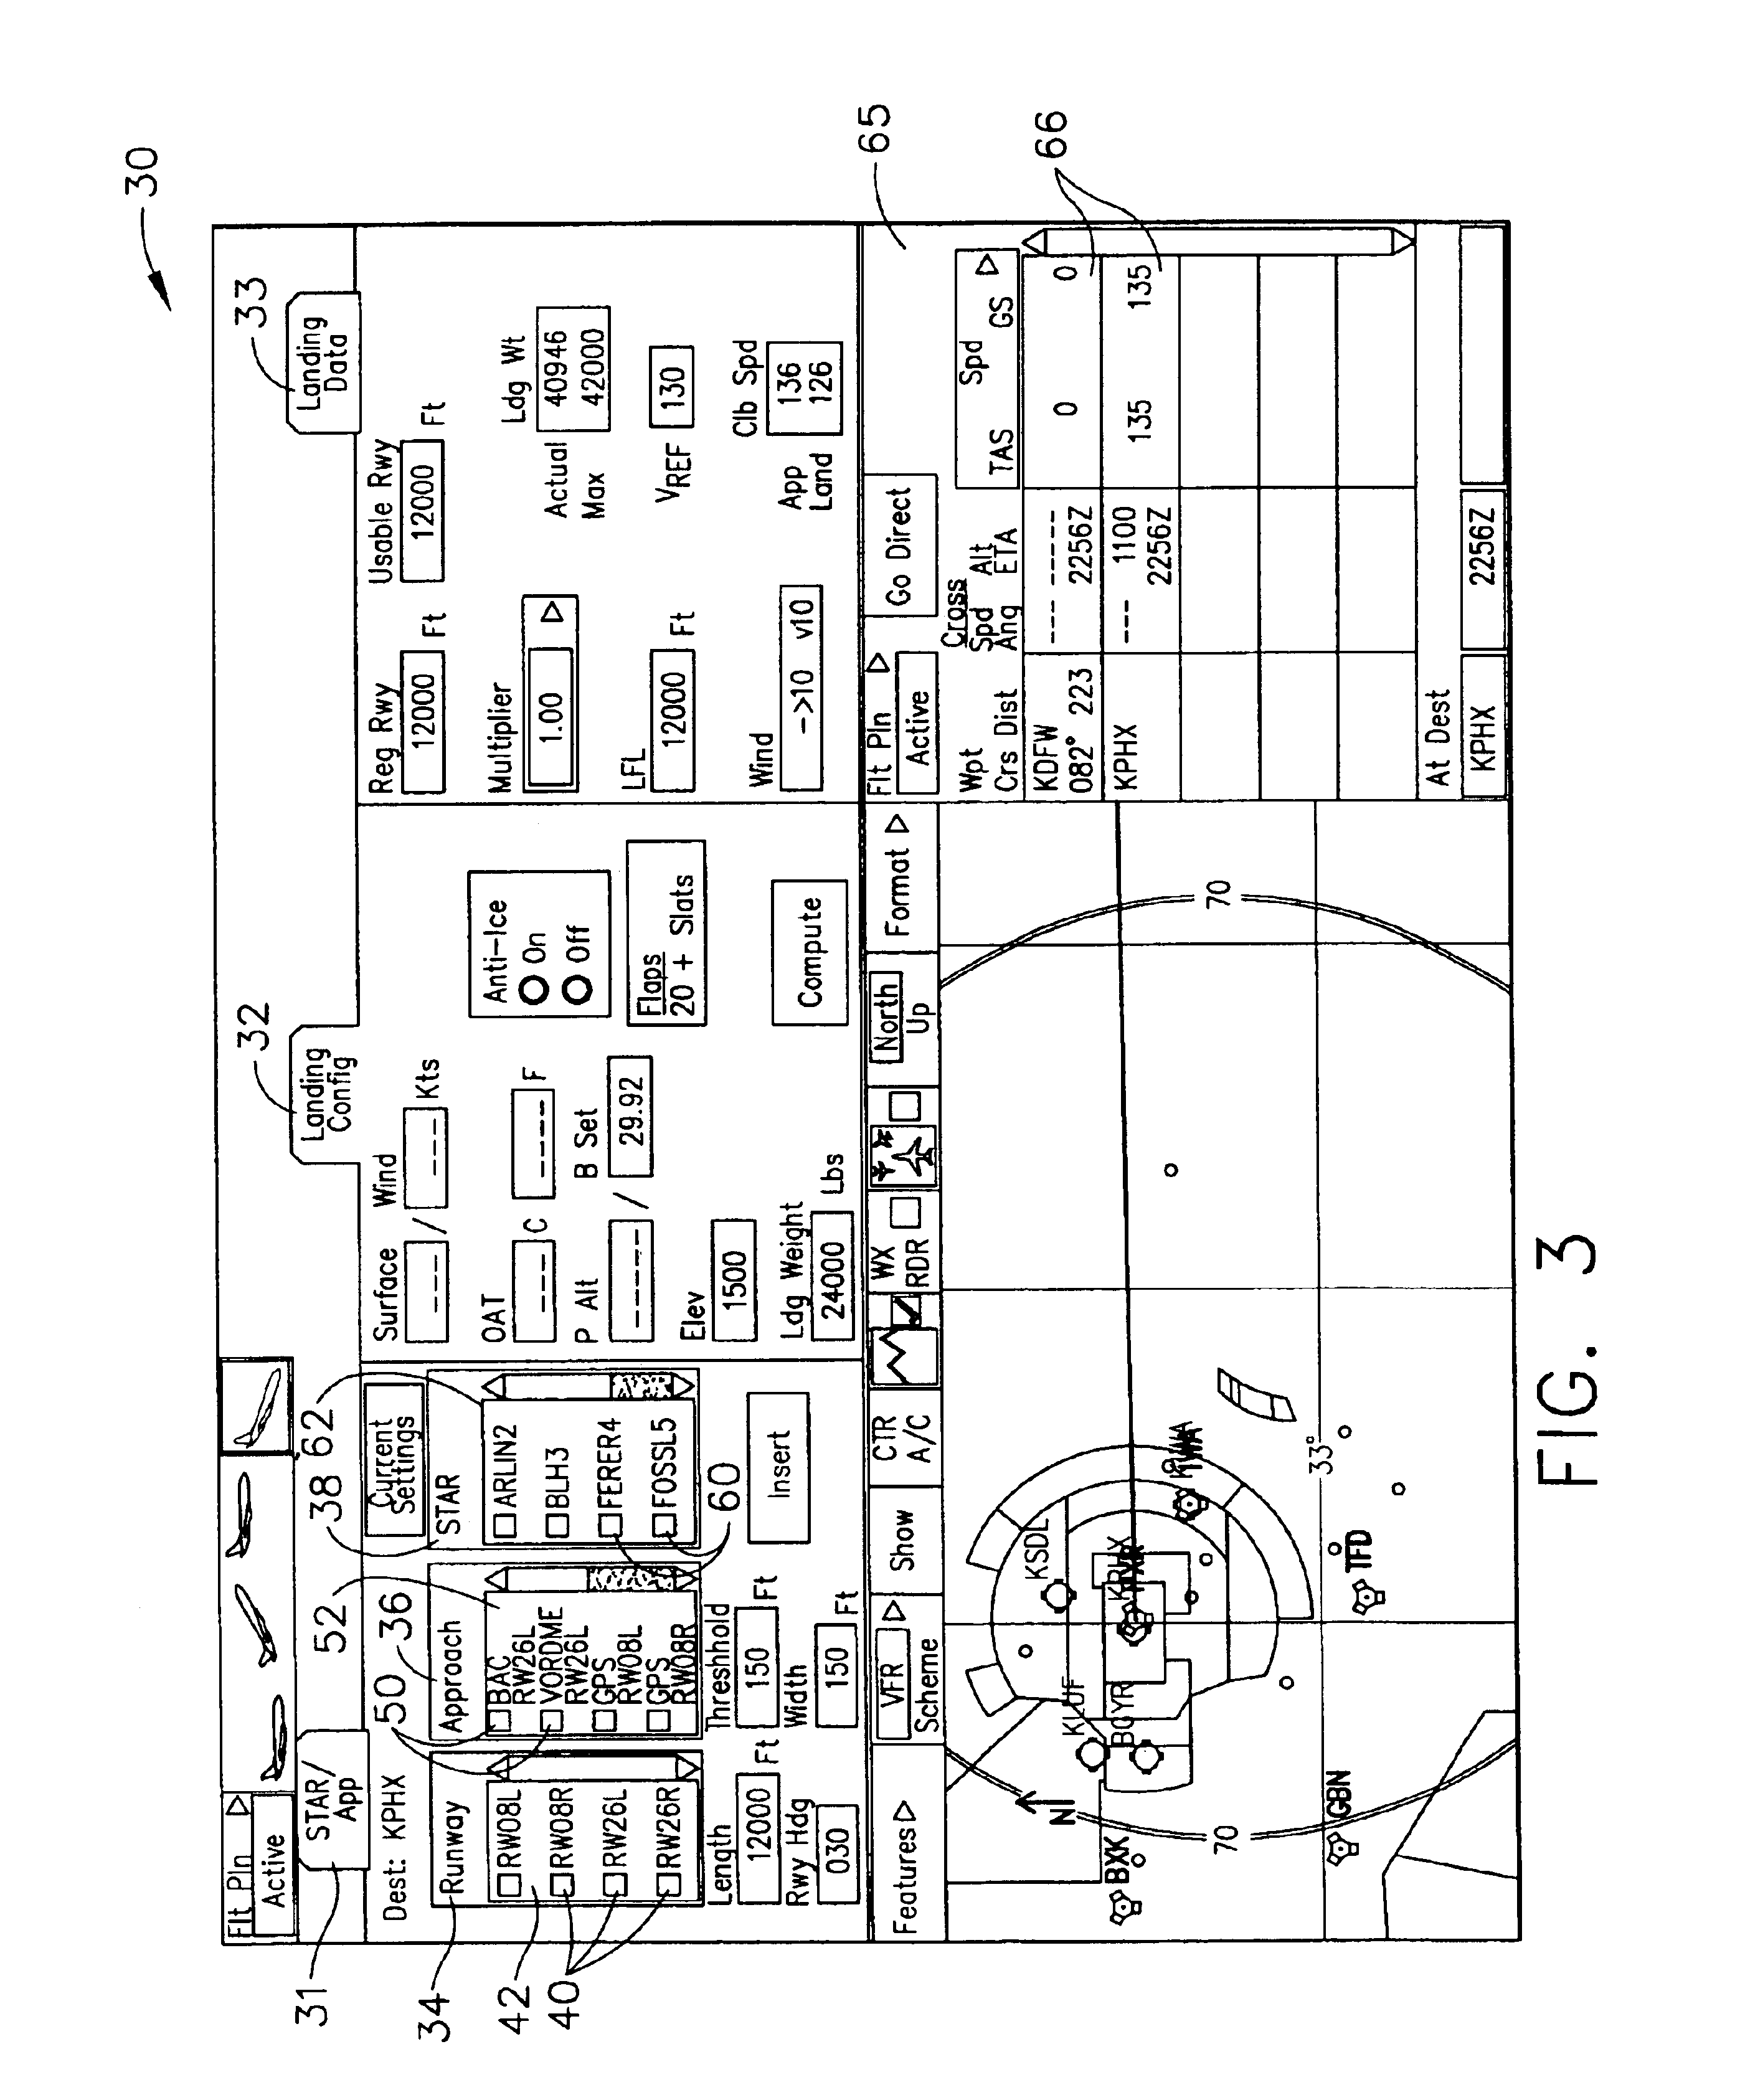 System for selecting and displaying flight management system procedures